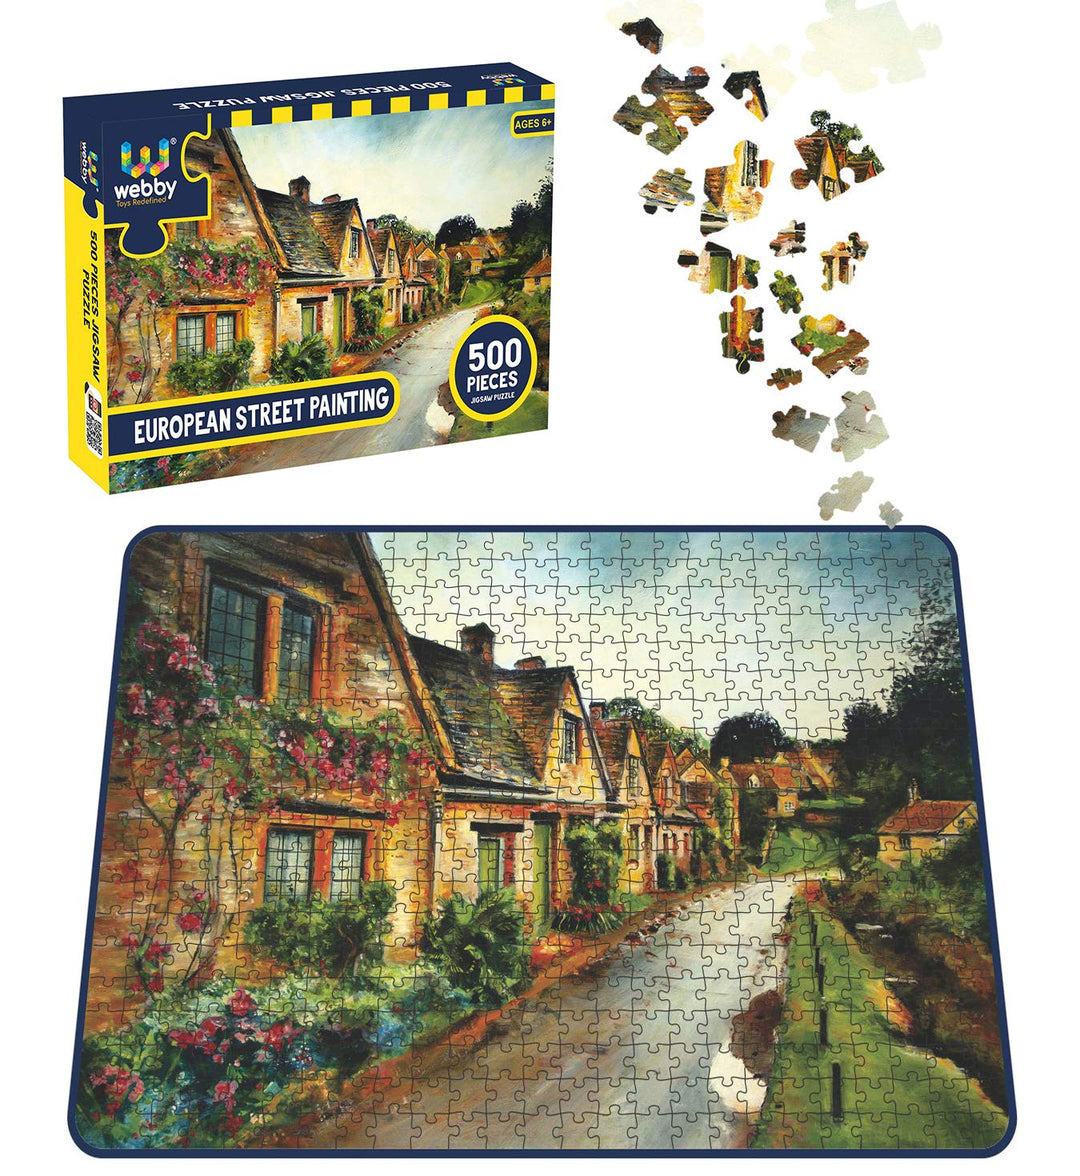 Webby European Street Painting Wooden Jigsaw Puzzle, 500 pieces